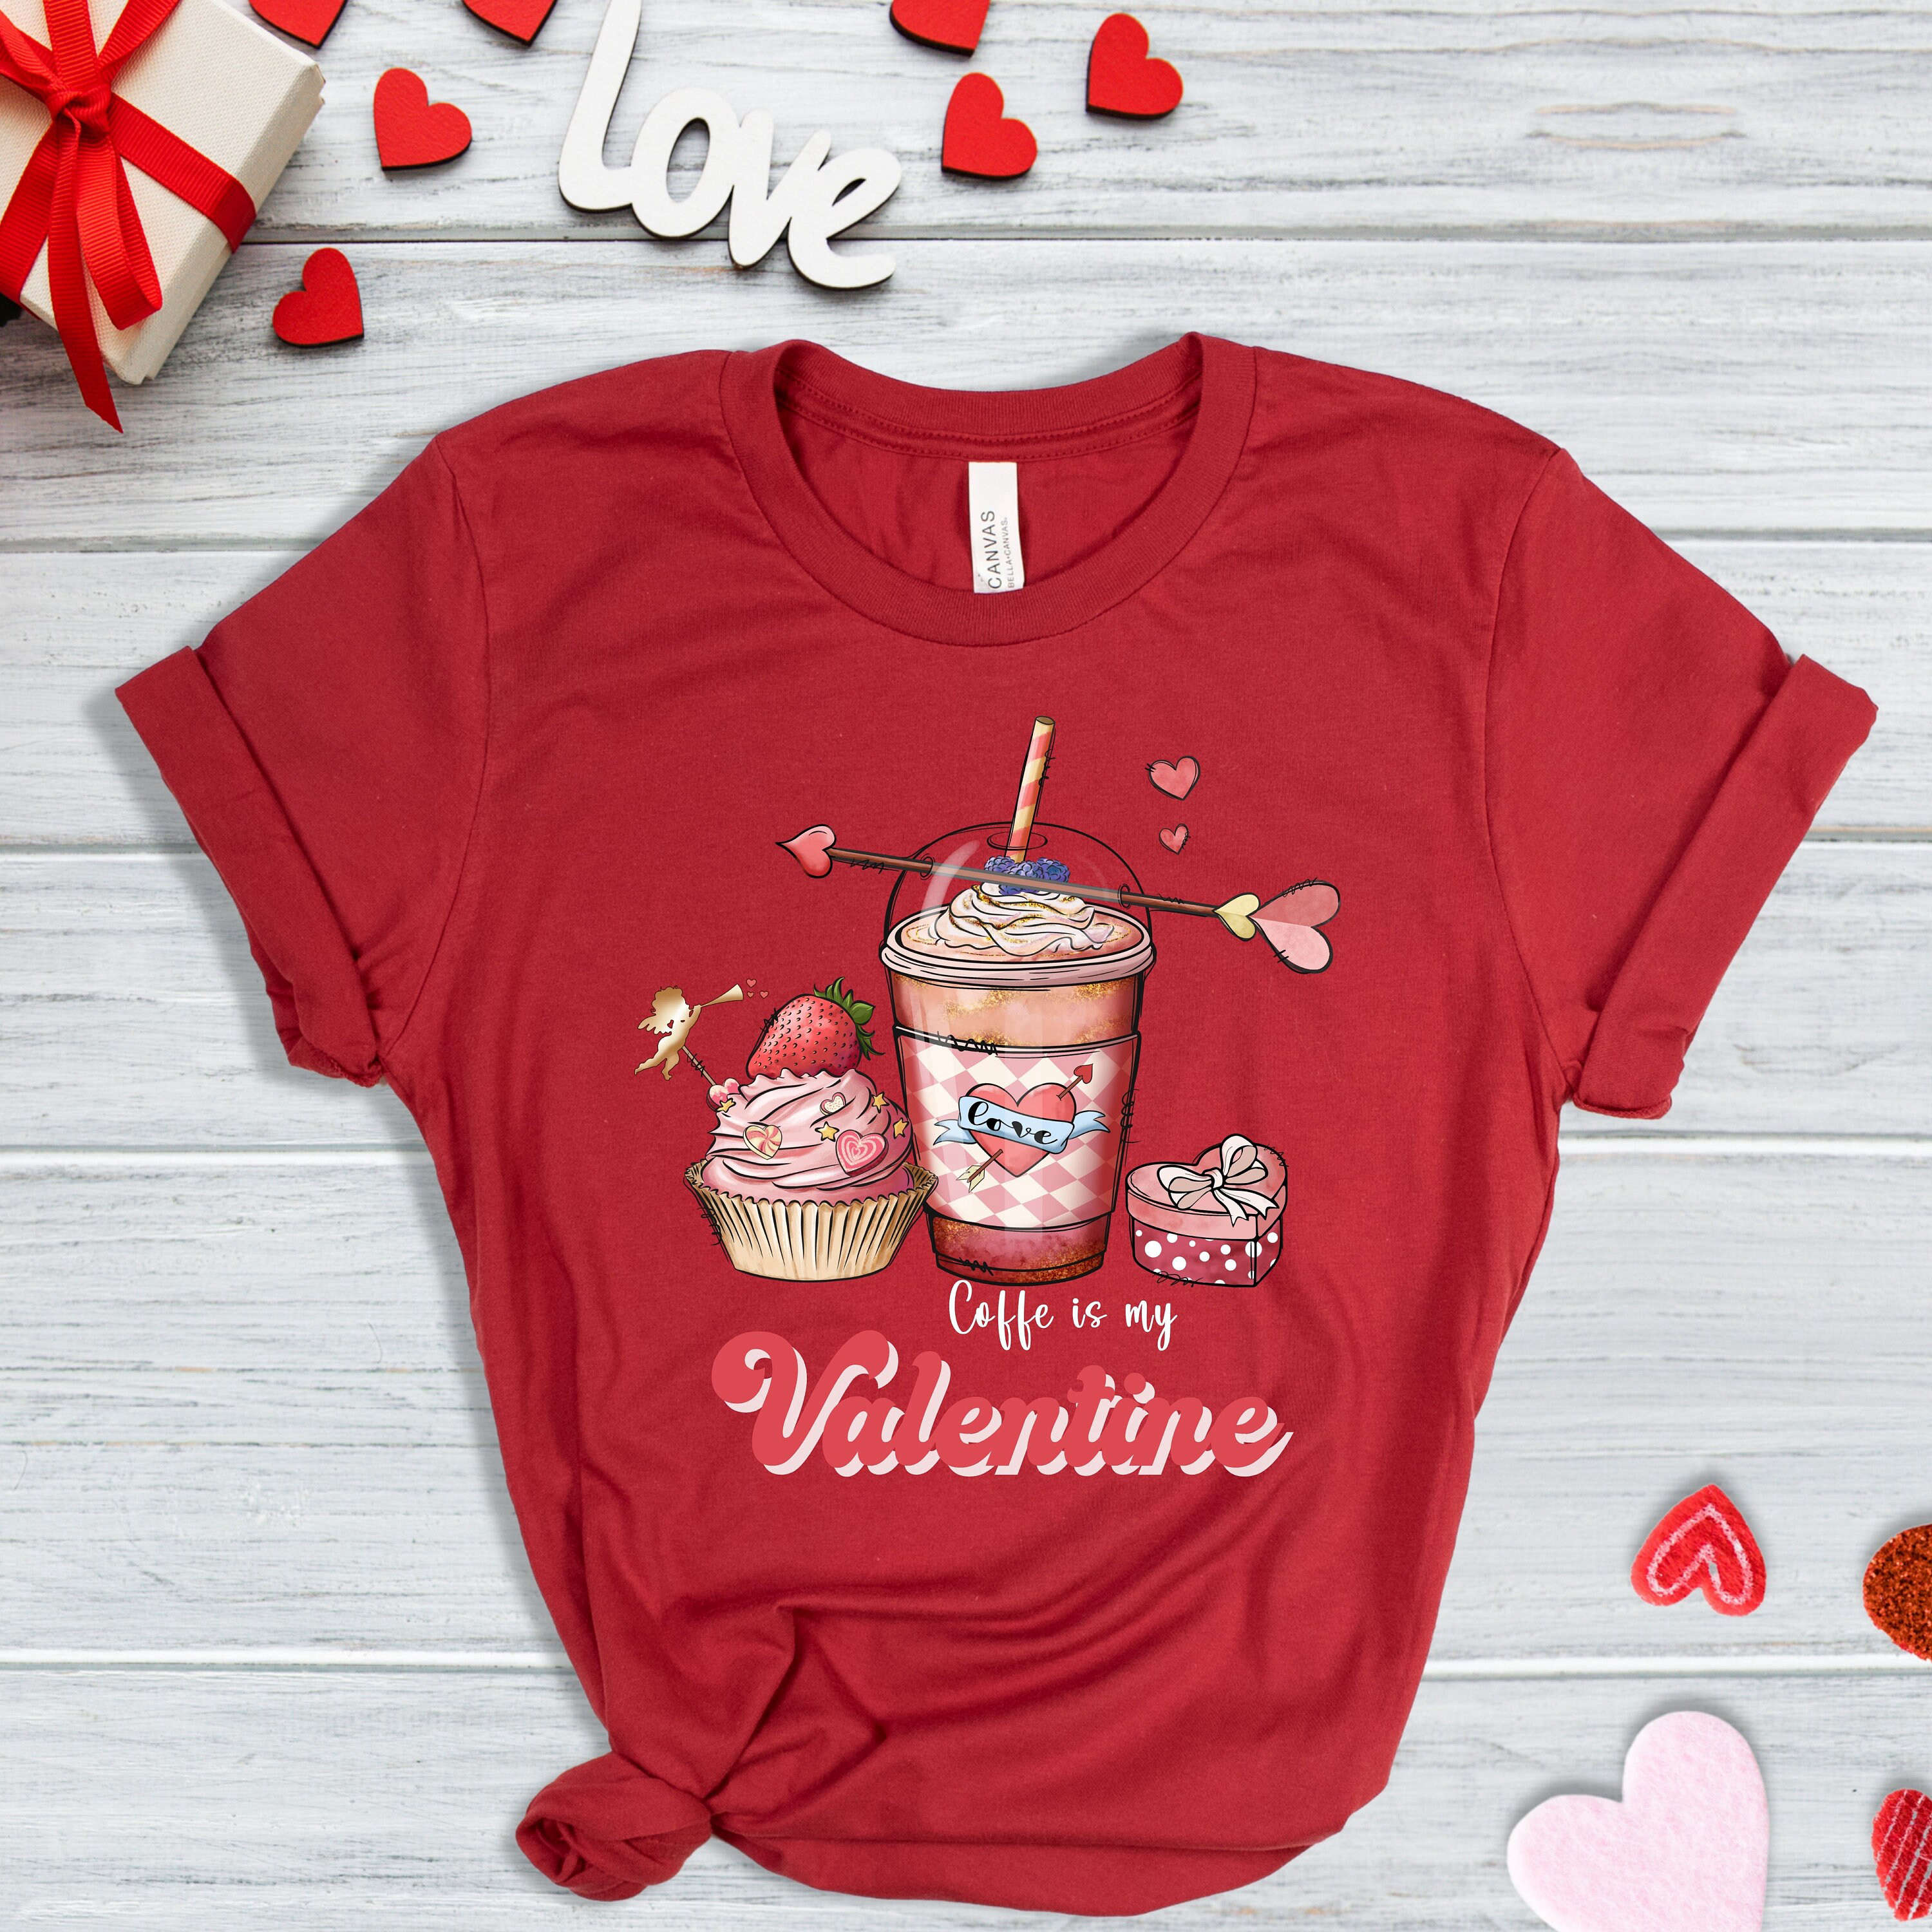 Coffee Is My Valentine T-shirt: Perfect Valentine s Day Gift for Coffee Lovers!